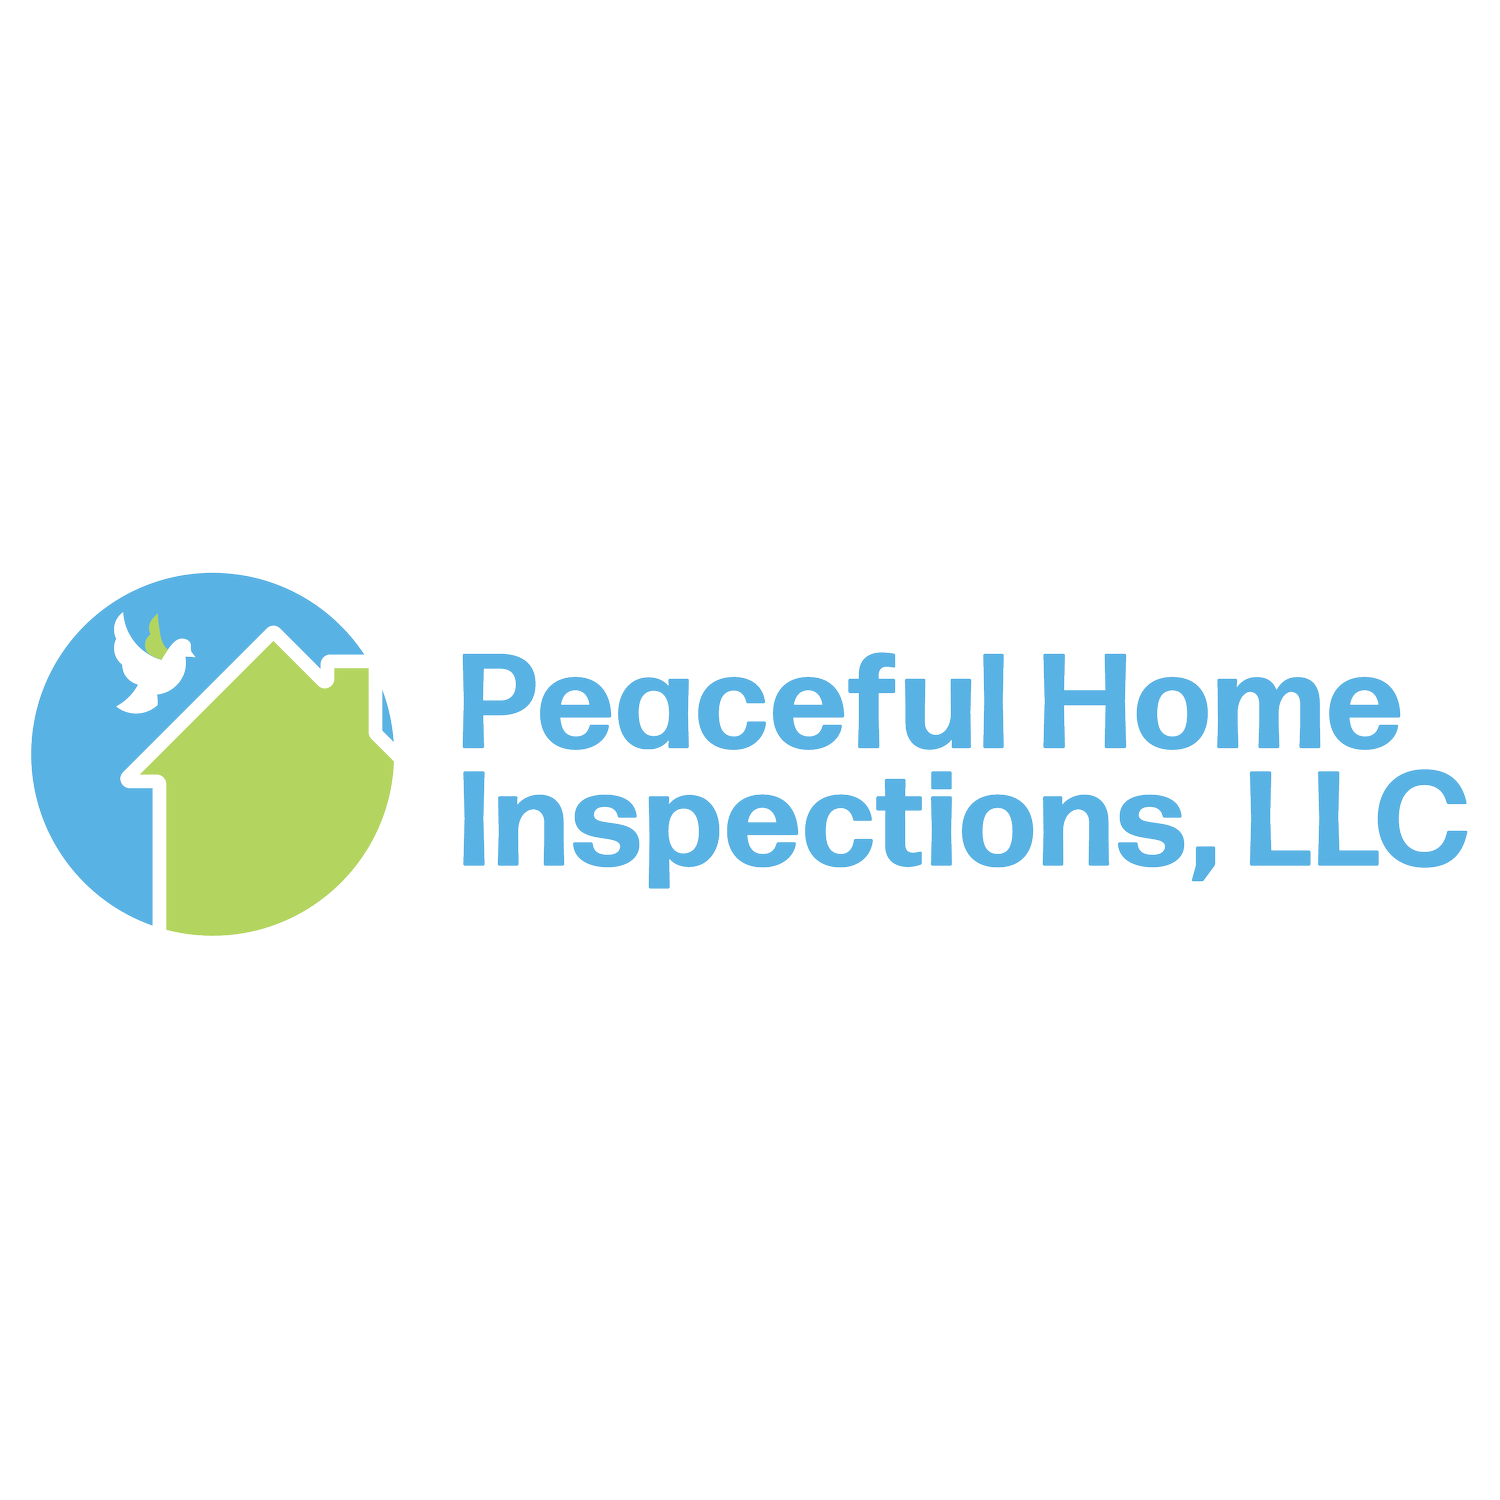 Peaceful Home Inspections, LLC